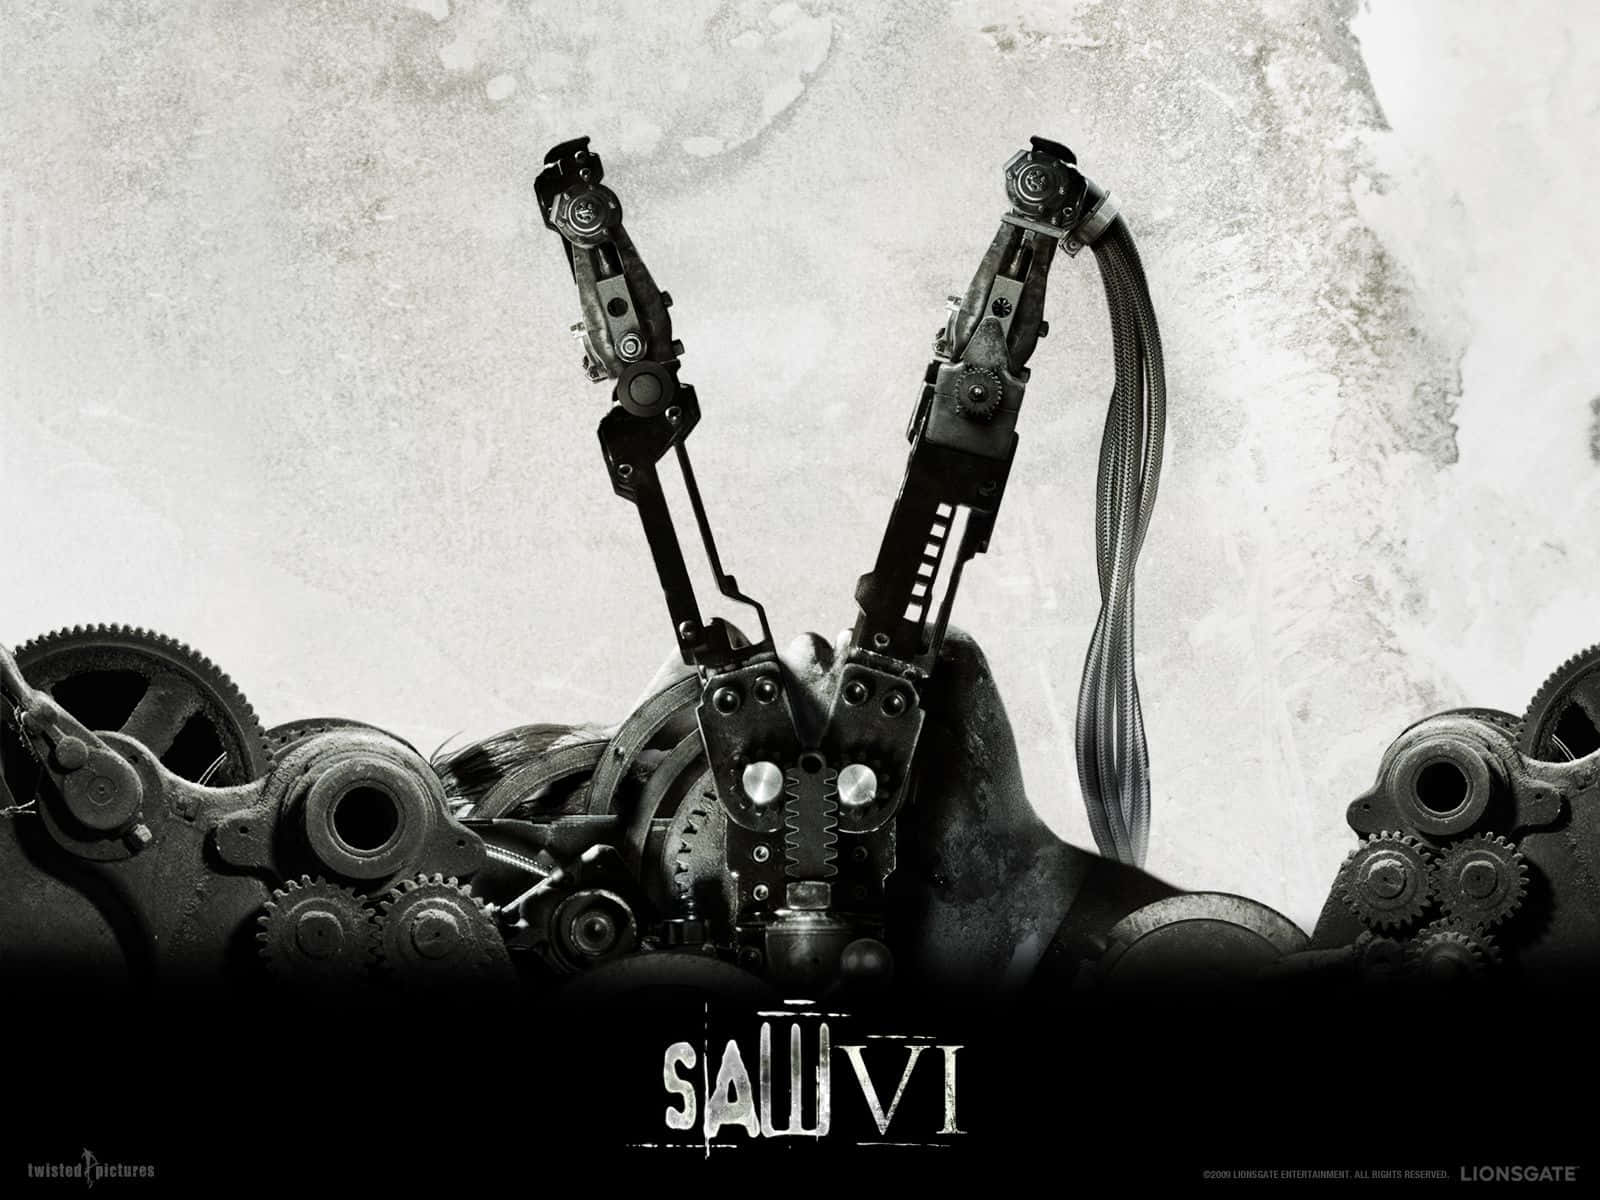 Saw Vi With Swords Wallpaper